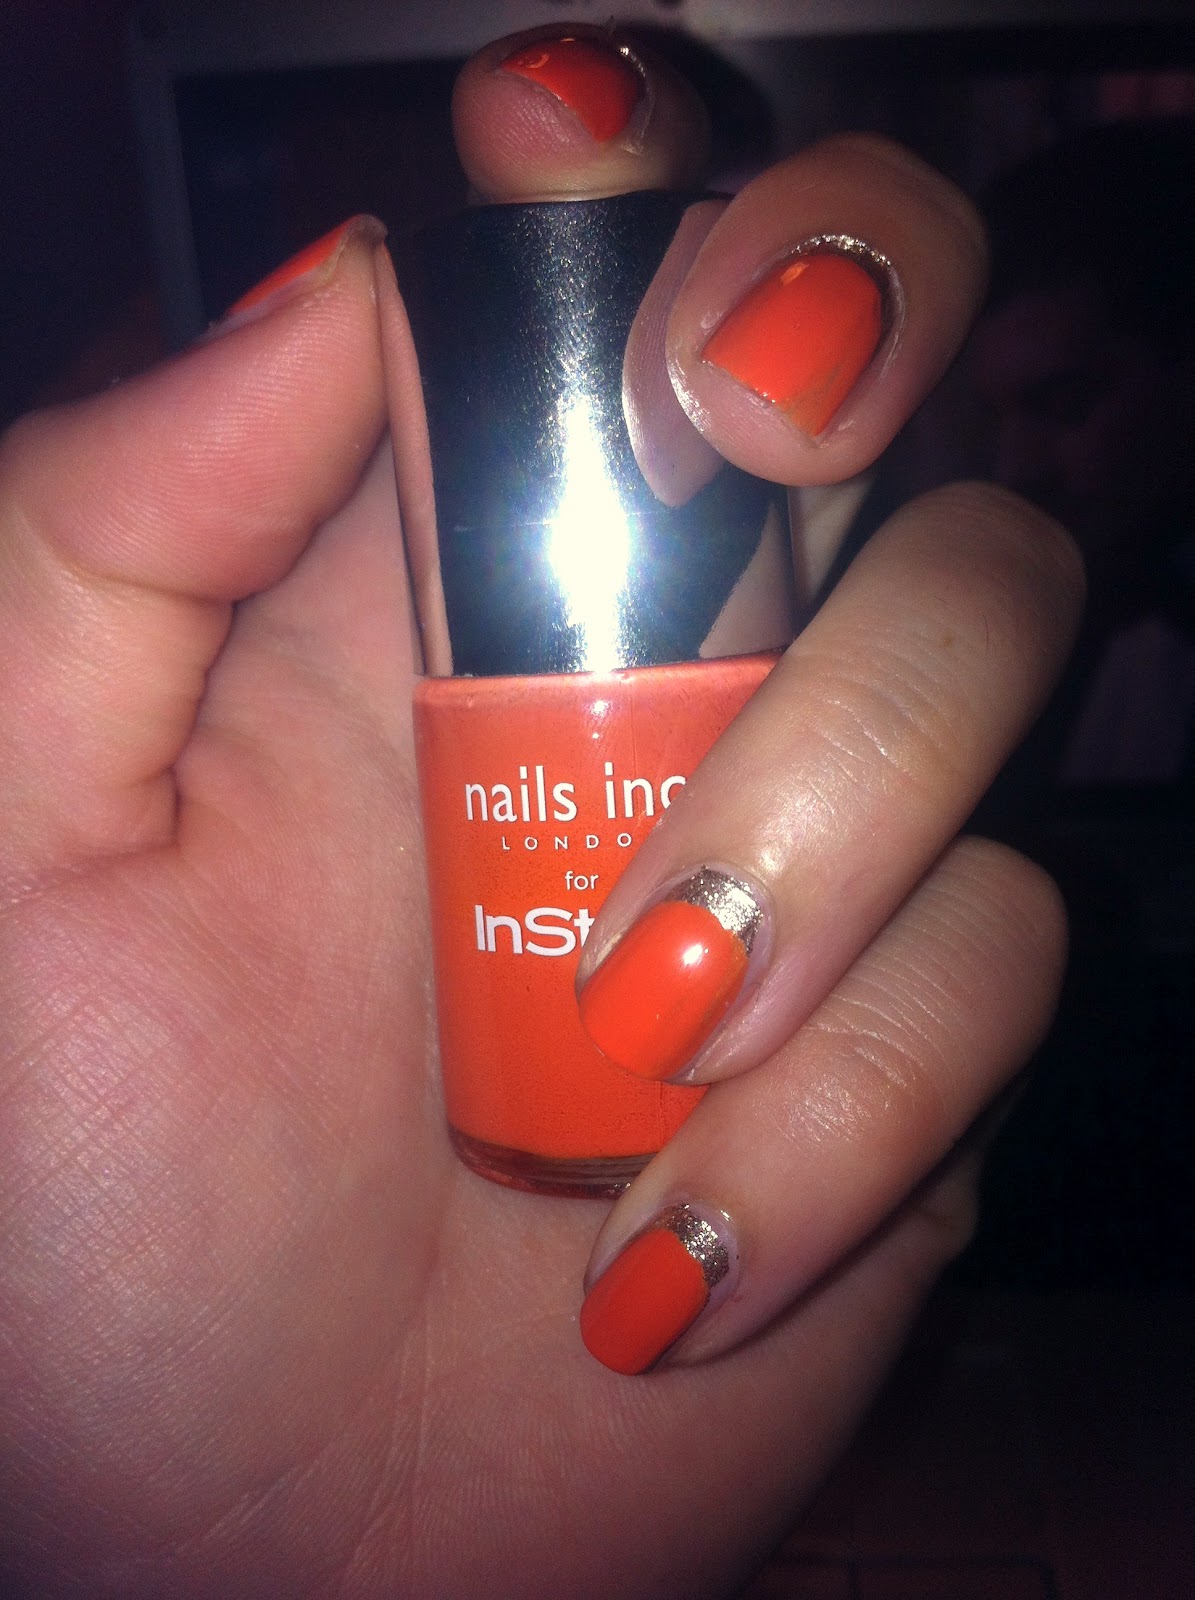 Then I used the orange Nails Inc colour that came with In Style a few months